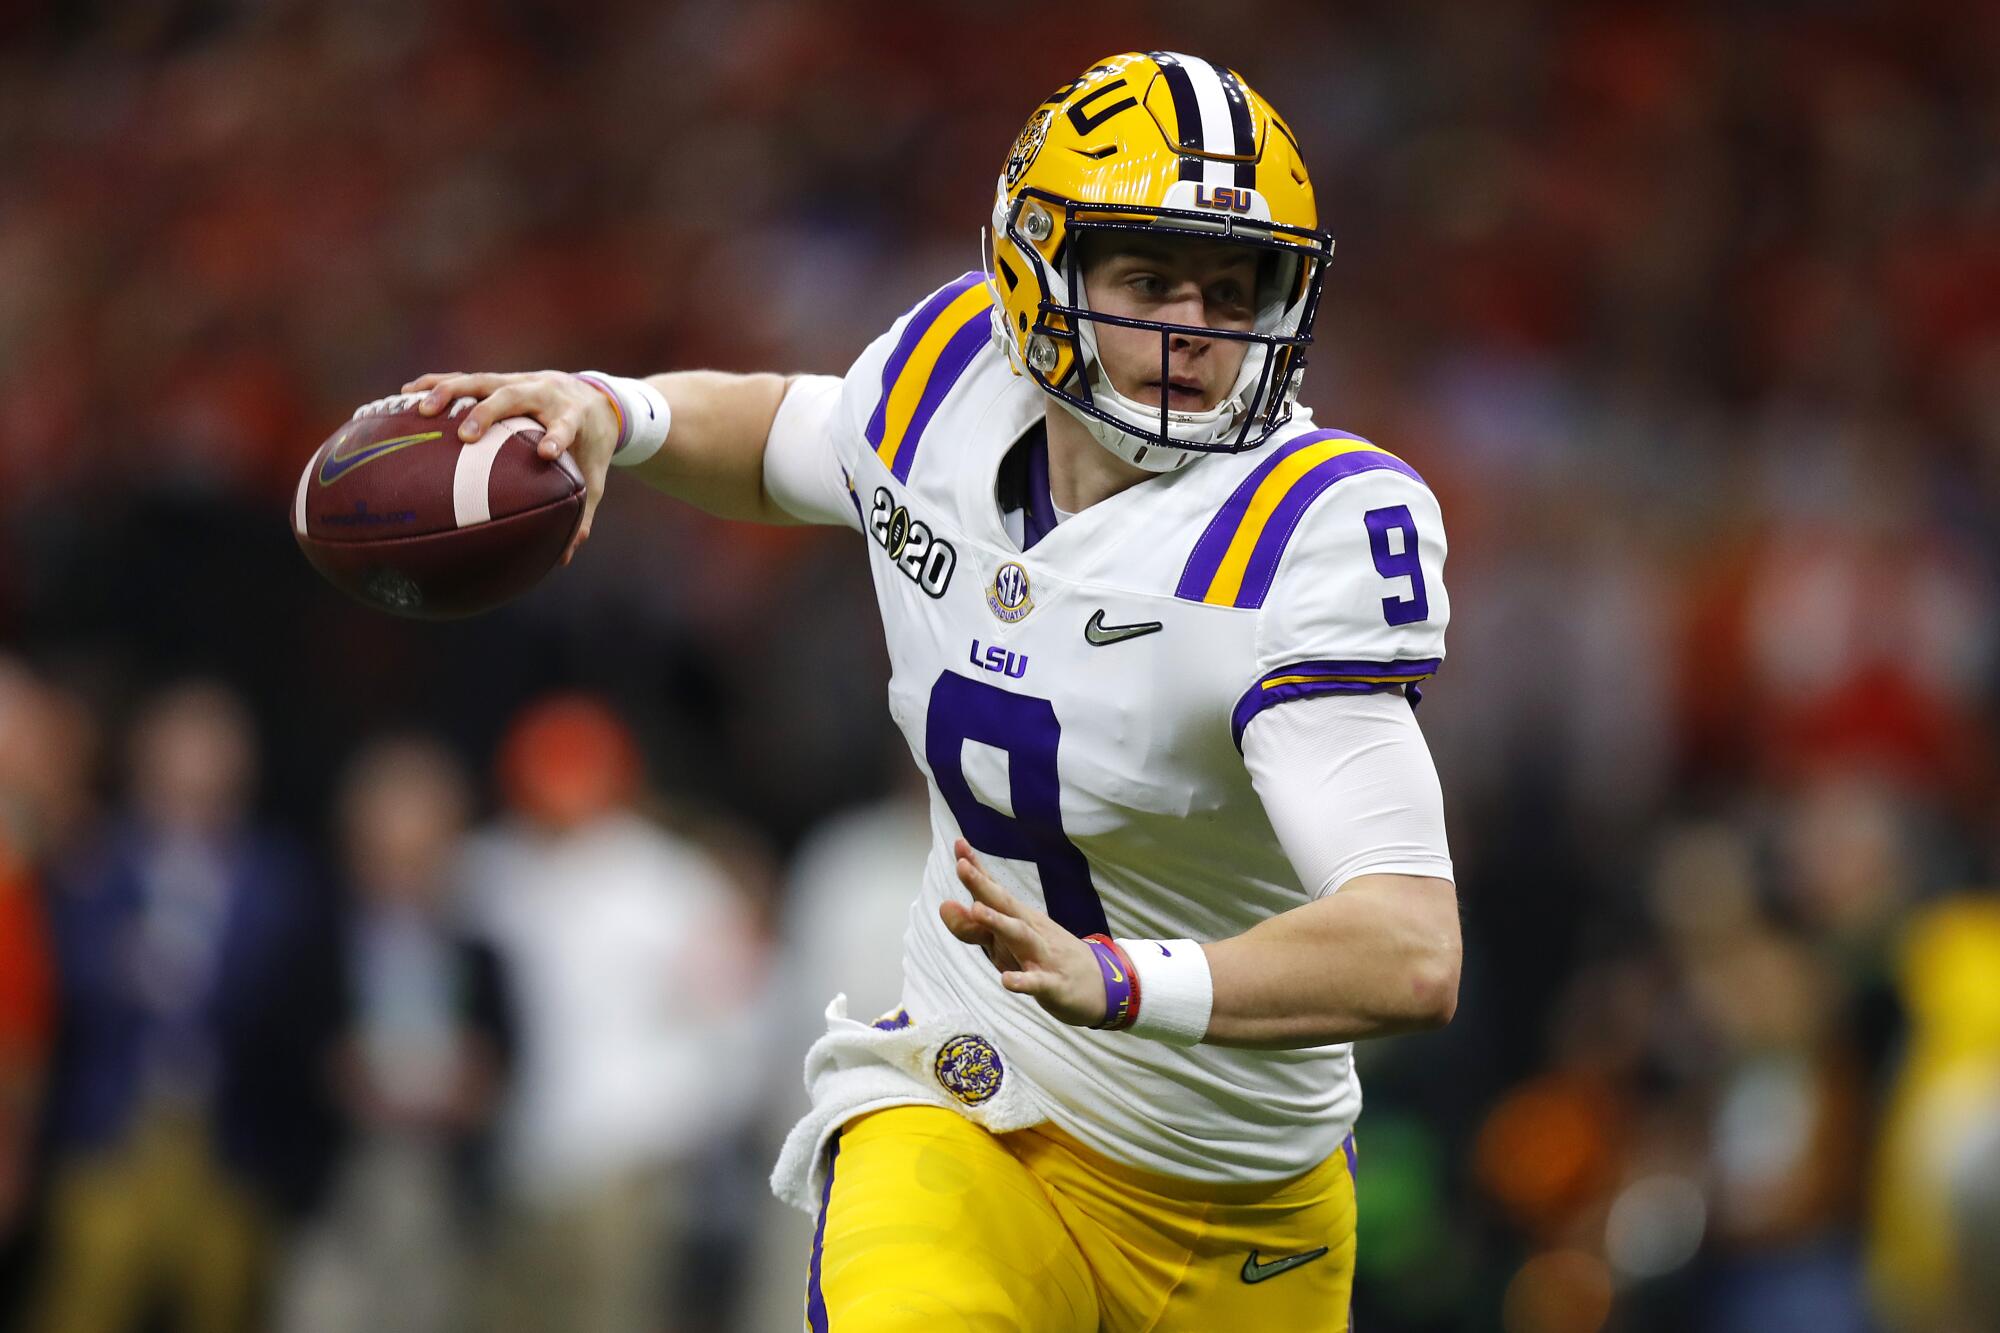 LSU quarterback Joe Burrow was selected No. 1 by the Cincinnati Bengals in the NFL draft on Thursday.